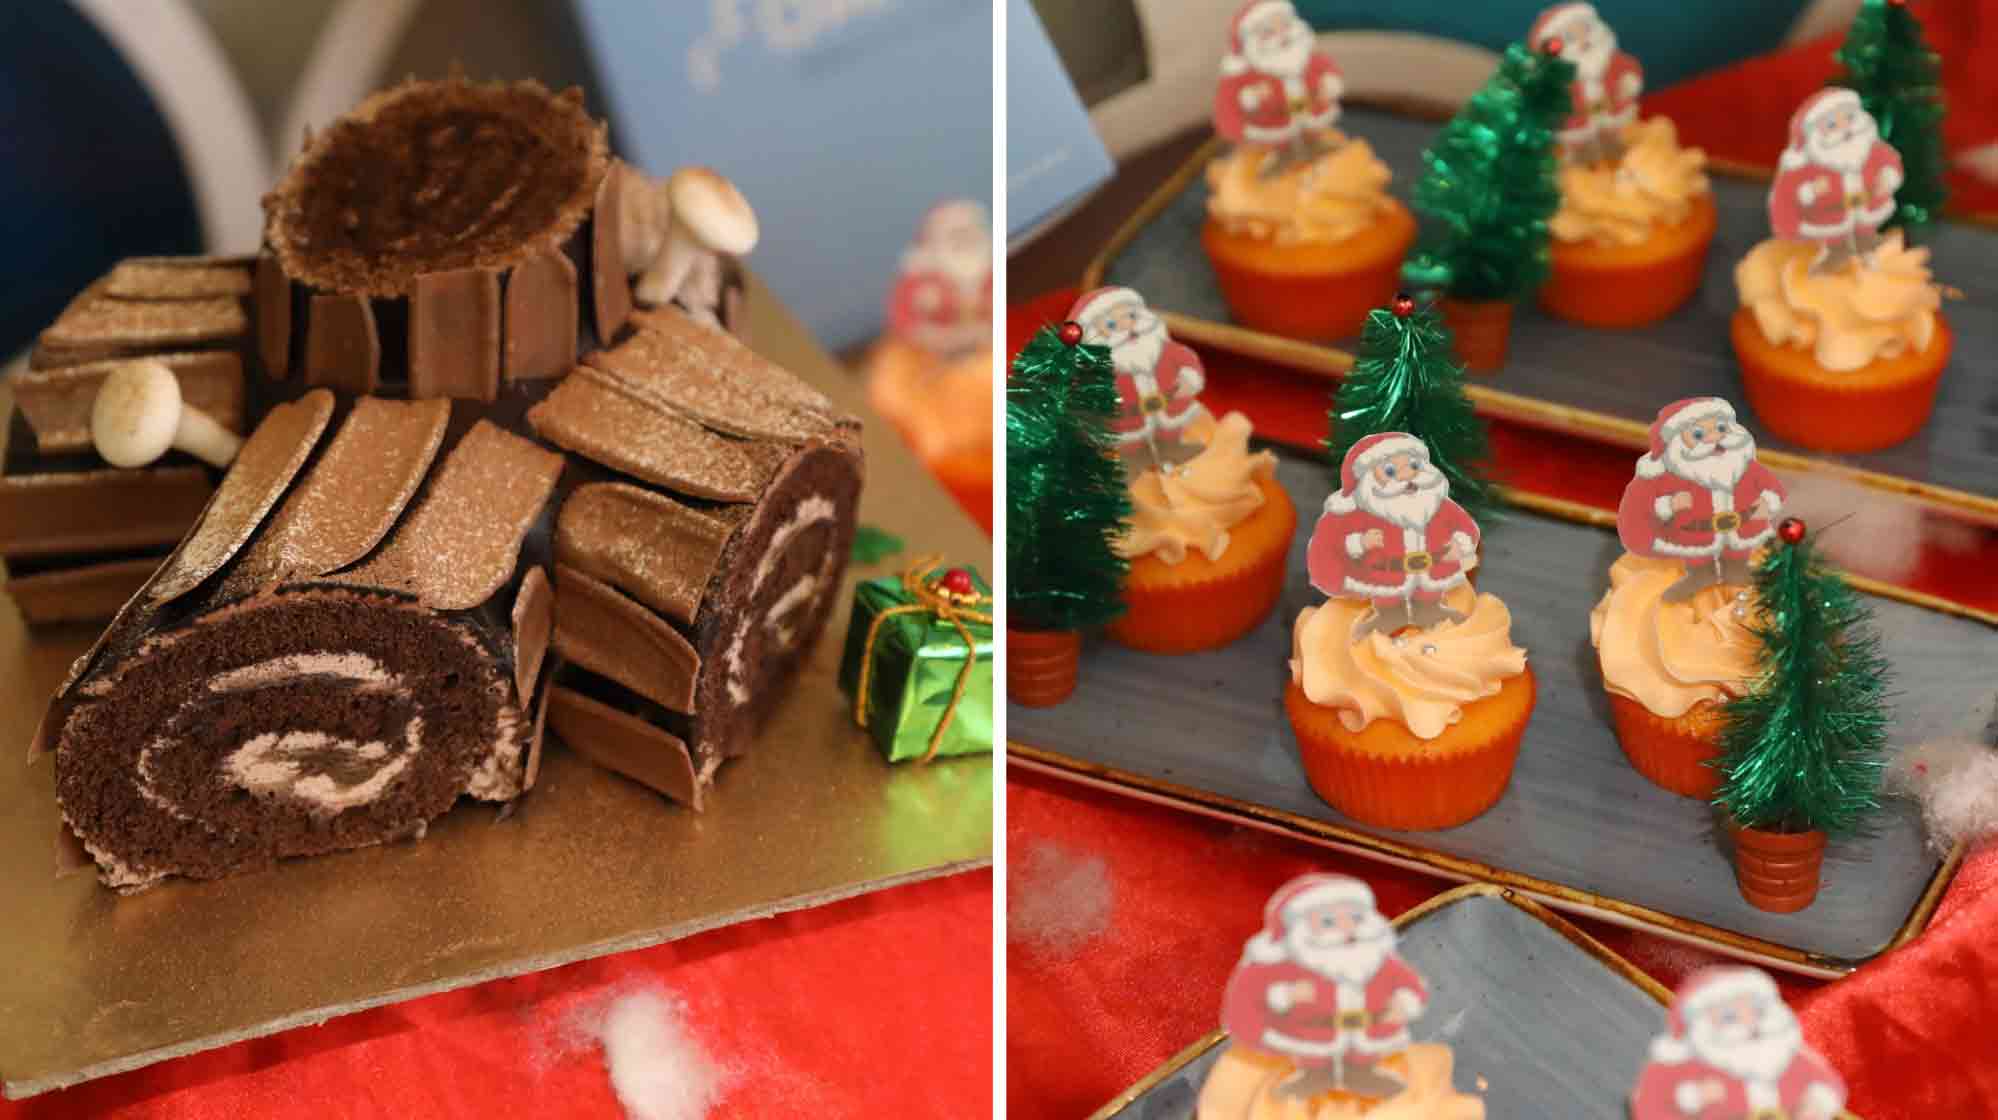 The star of the show was the double chocolate Yule Log (left). This decadent chocolate cake log resembles the Swiss Roll where the cake is delicately rolled while still warm and filled with frosting thereafter. The orange-flavoured Santa cupcakes were also a crowd-pleaser. These treats will be part of Dariole’s Christmas-special menu